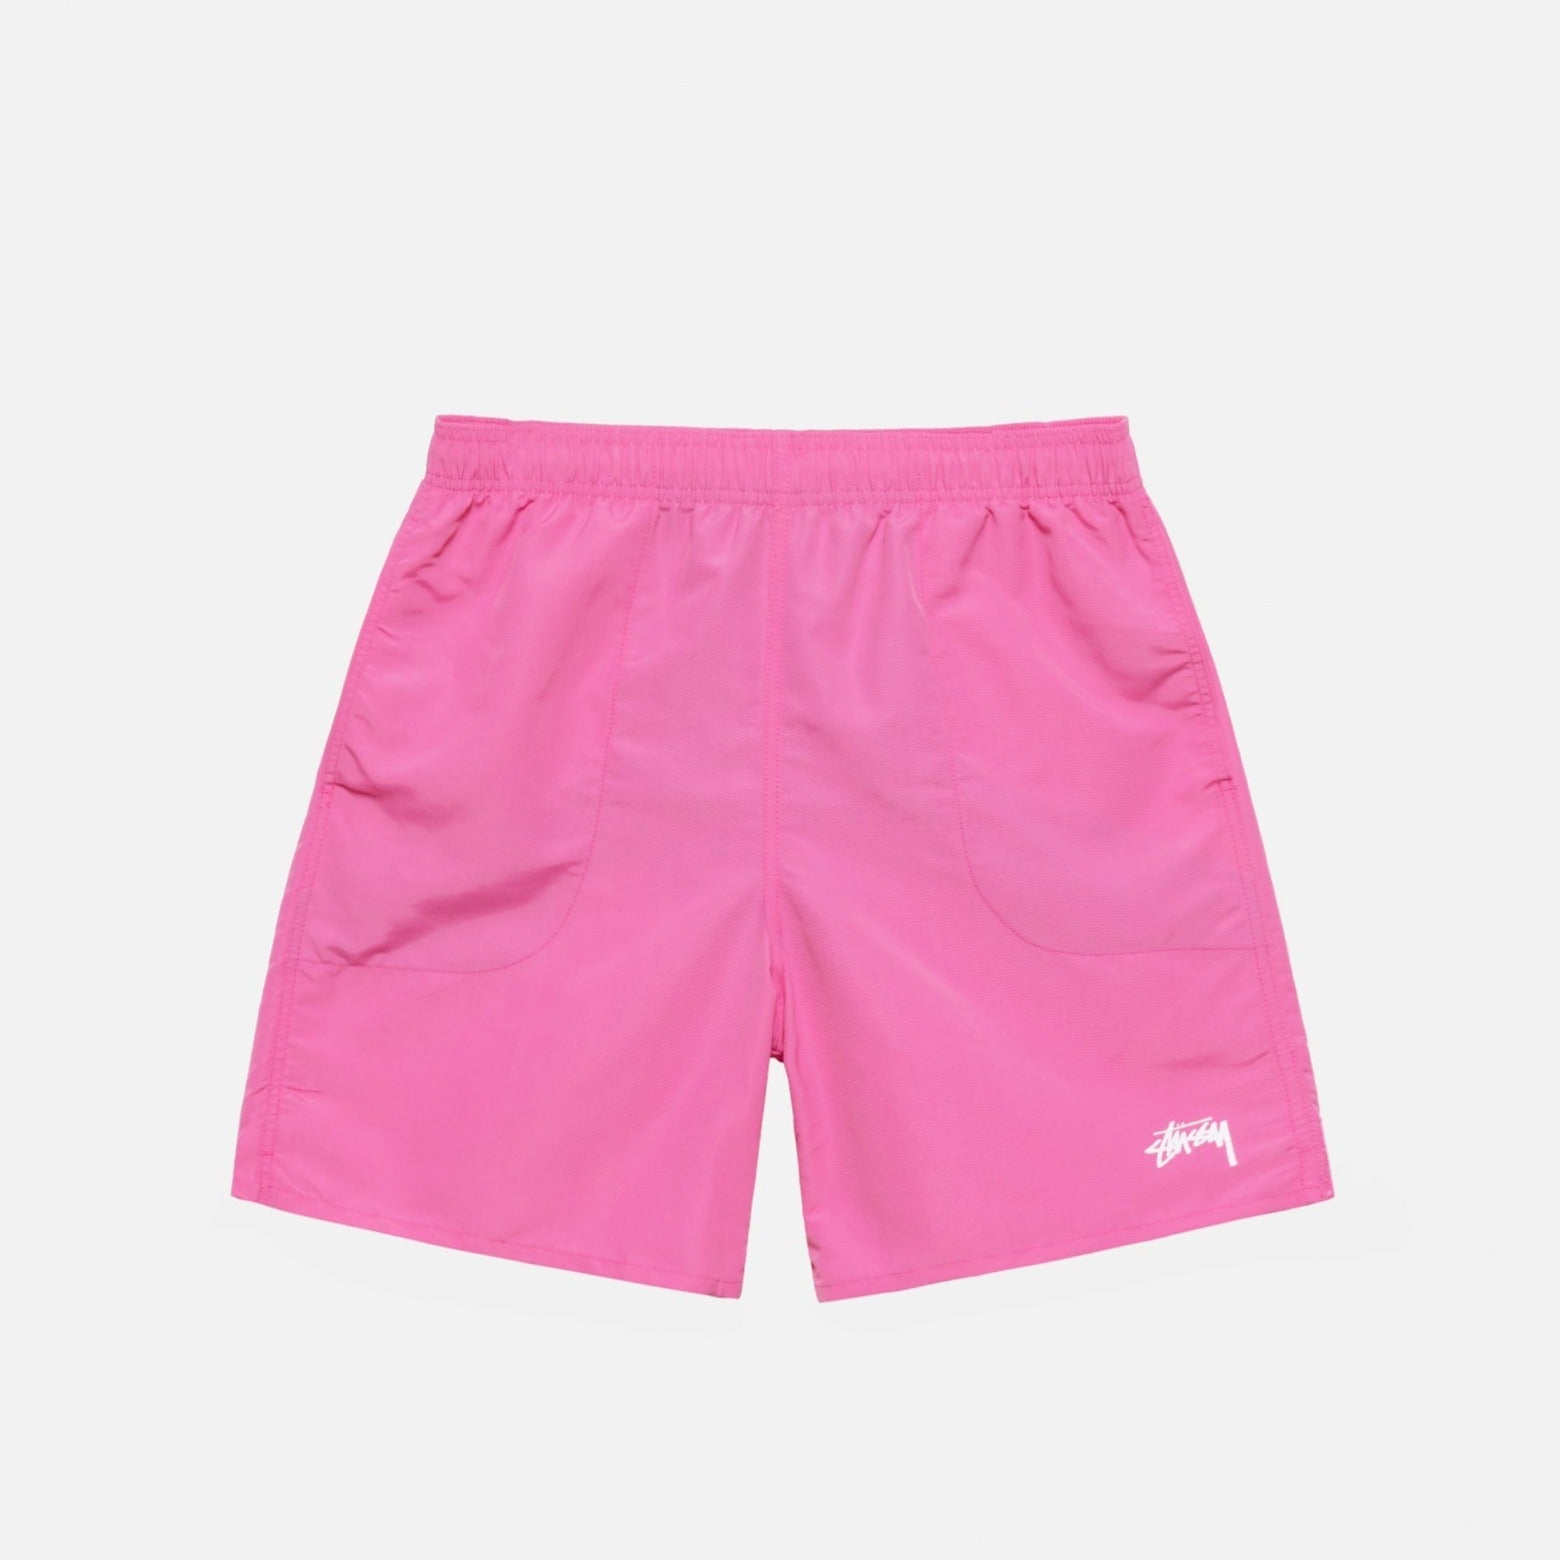 Flat detail photo of the Stock Water Short - Gum Pink.